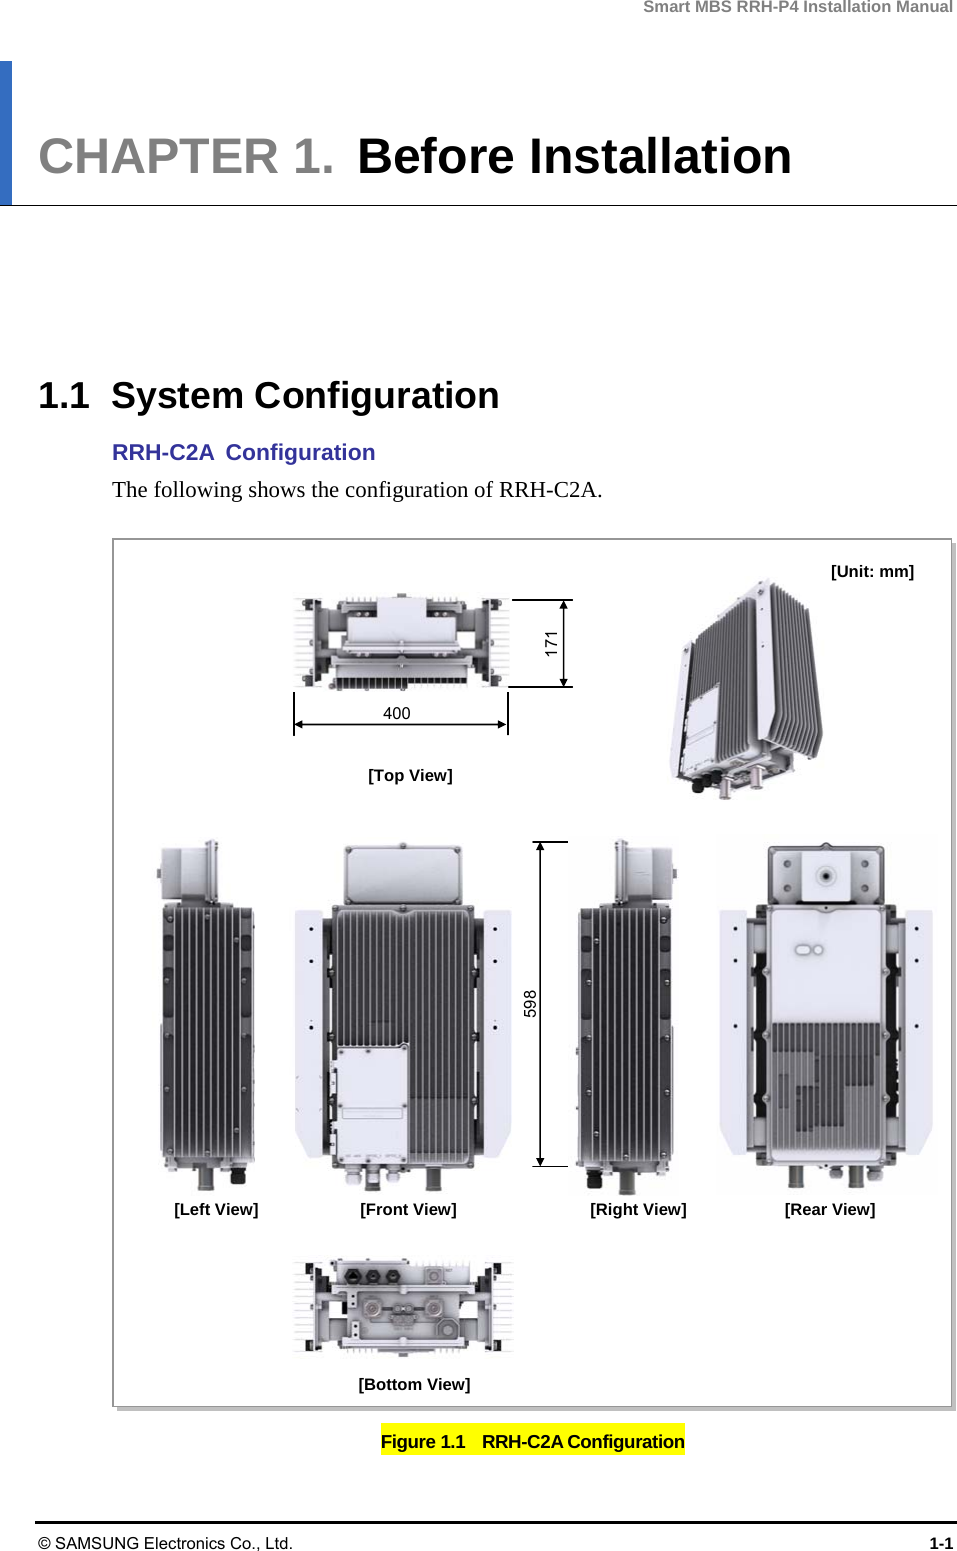 Smart MBS RRH-P4 Installation Manual © SAMSUNG Electronics Co., Ltd.  1-1 CHAPTER 1.  Before Installation      1.1 System Configuration RRH-C2A Configuration The following shows the configuration of RRH-C2A.  Figure 1.1    RRH-C2A Configuration [Top View] [Unit: mm][Front View] [Bottom View][Right View] [Left View]  [Rear View] 598 171 400